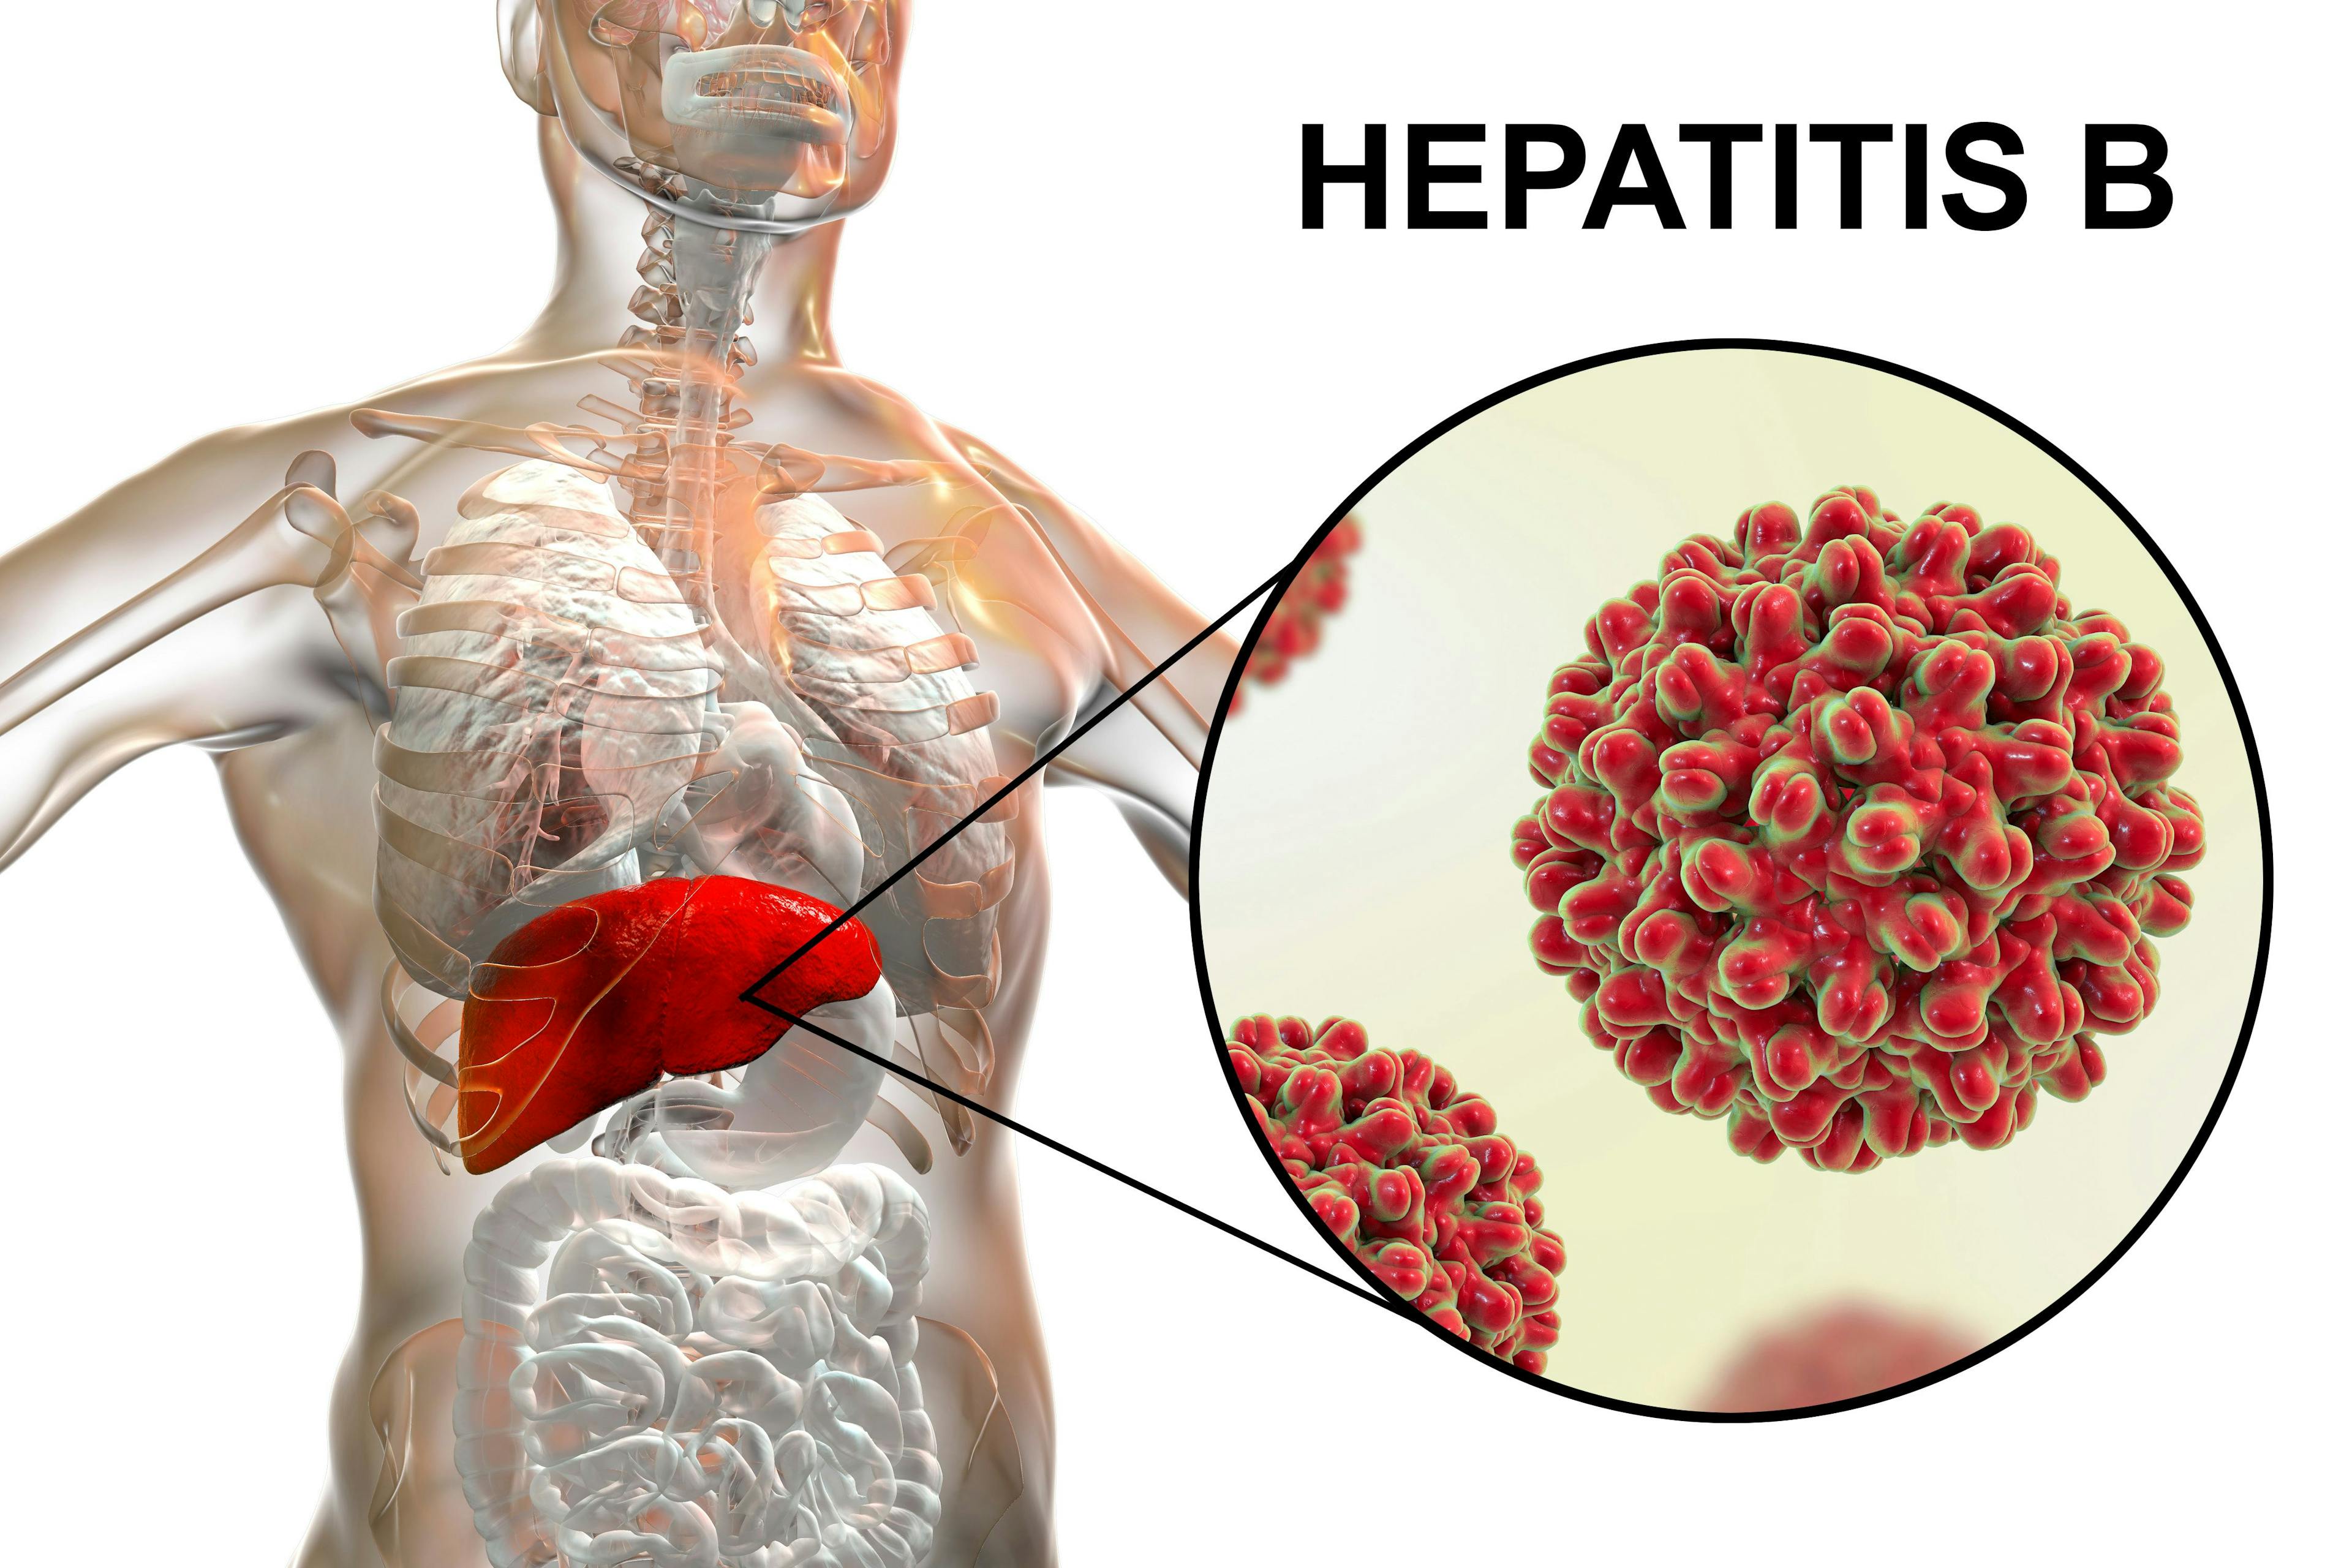 hepatitis B diagram pointing to the liver | Image credit: Dr_Microbe - stock.adobe.com